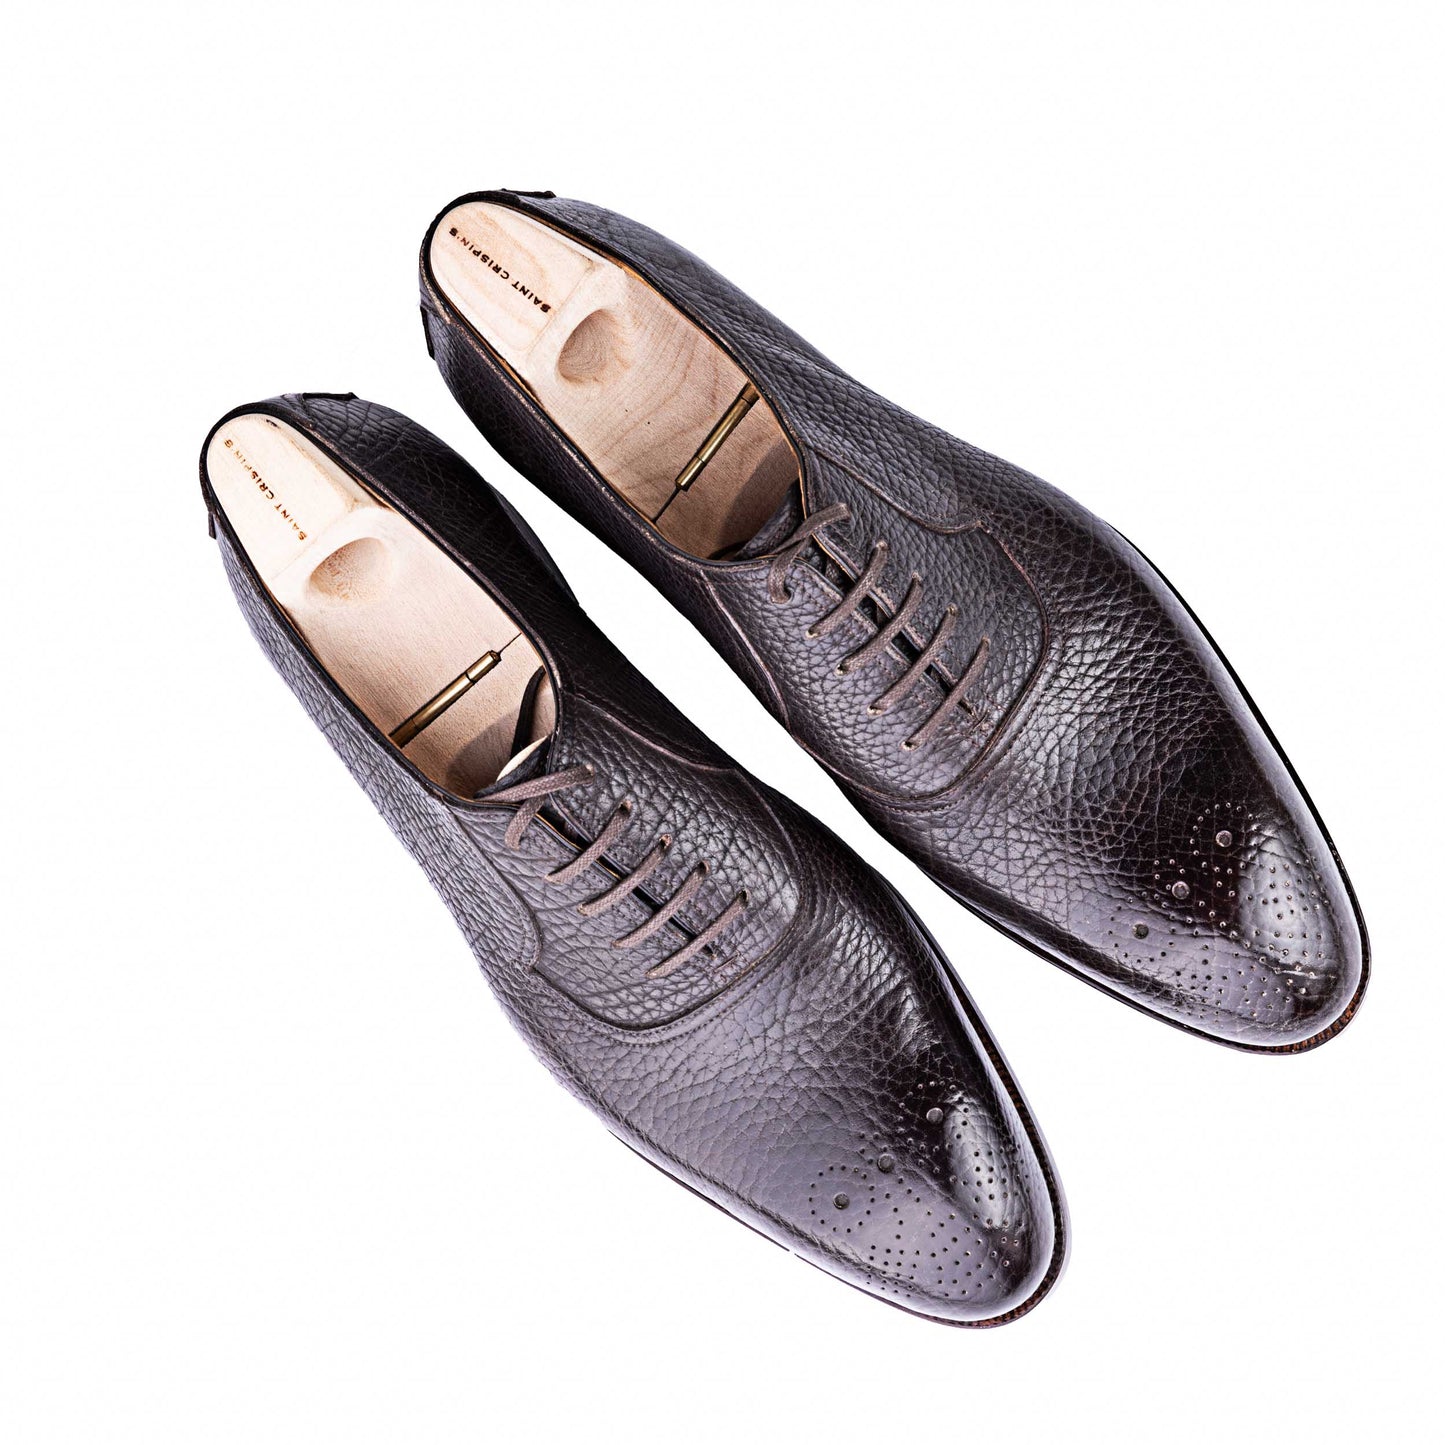 Plain oxford with perforated tip